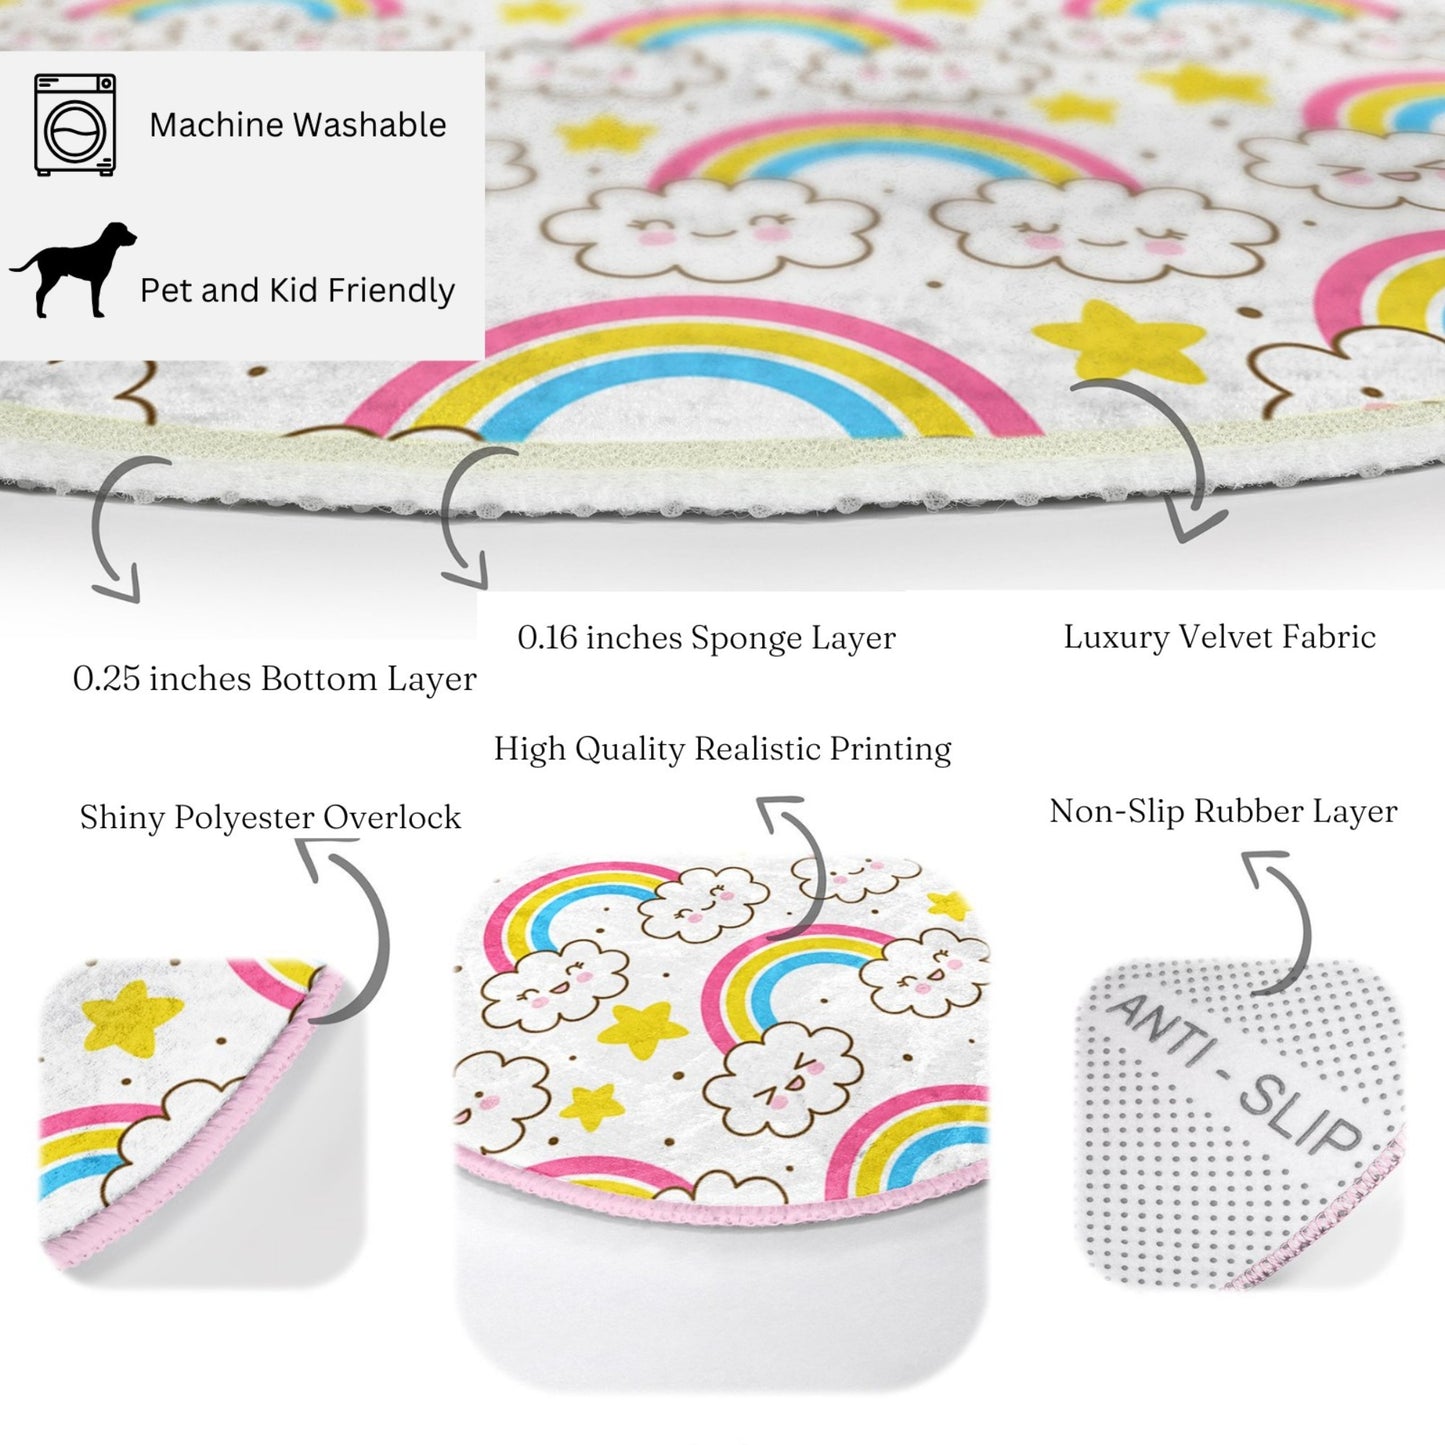 Easy-to-Clean Smile Cloud with Rainbow Patterned Rug